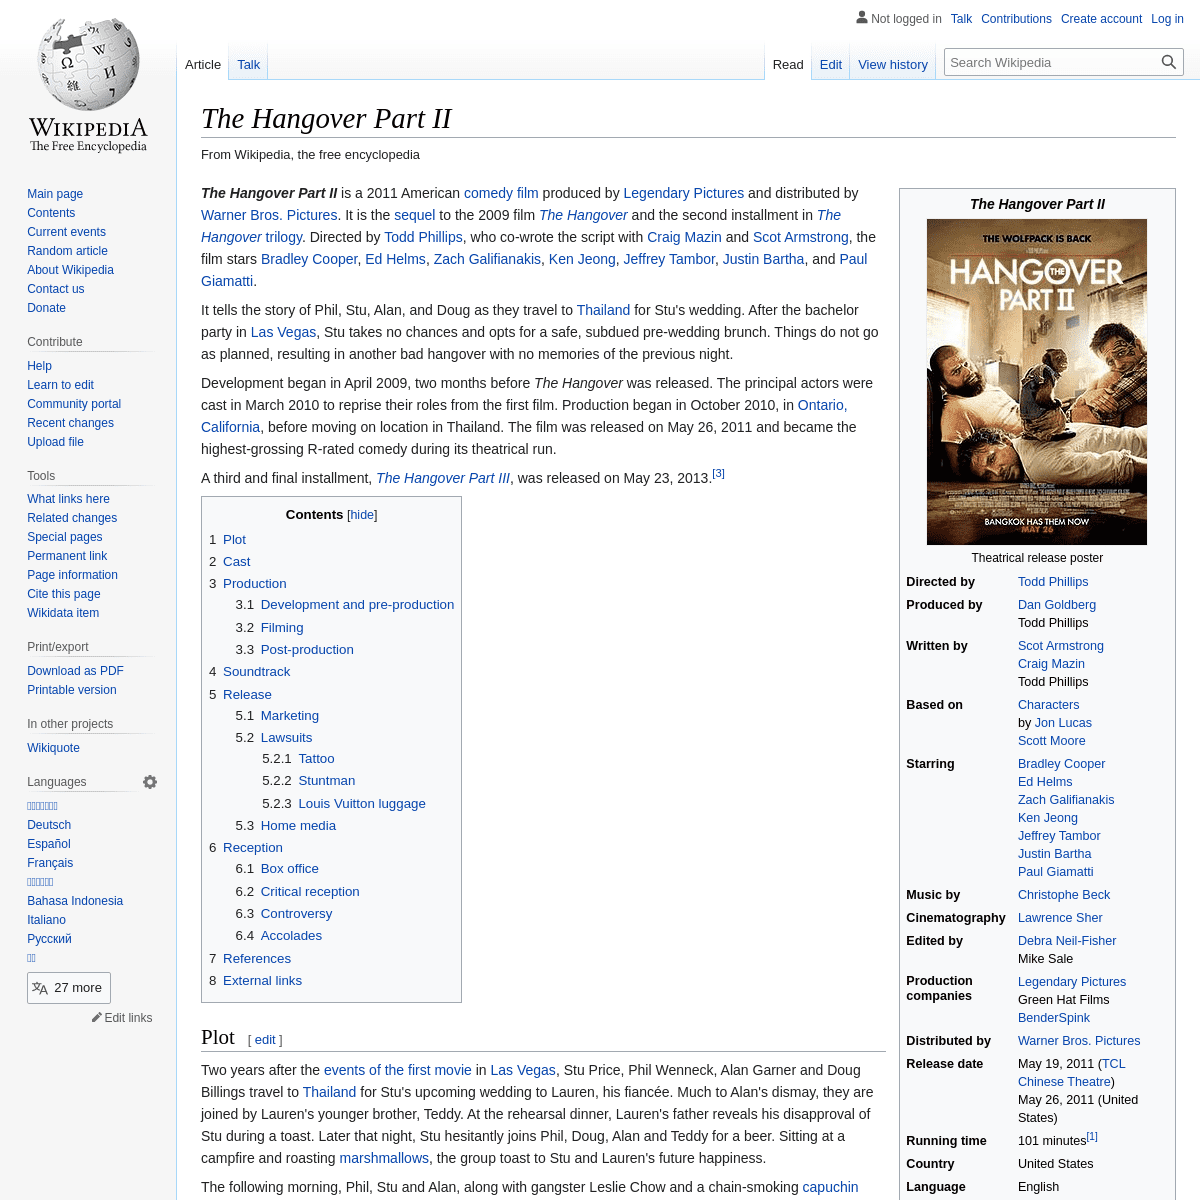 A complete backup of https://en.wikipedia.org/wiki/The_Hangover_Part_II